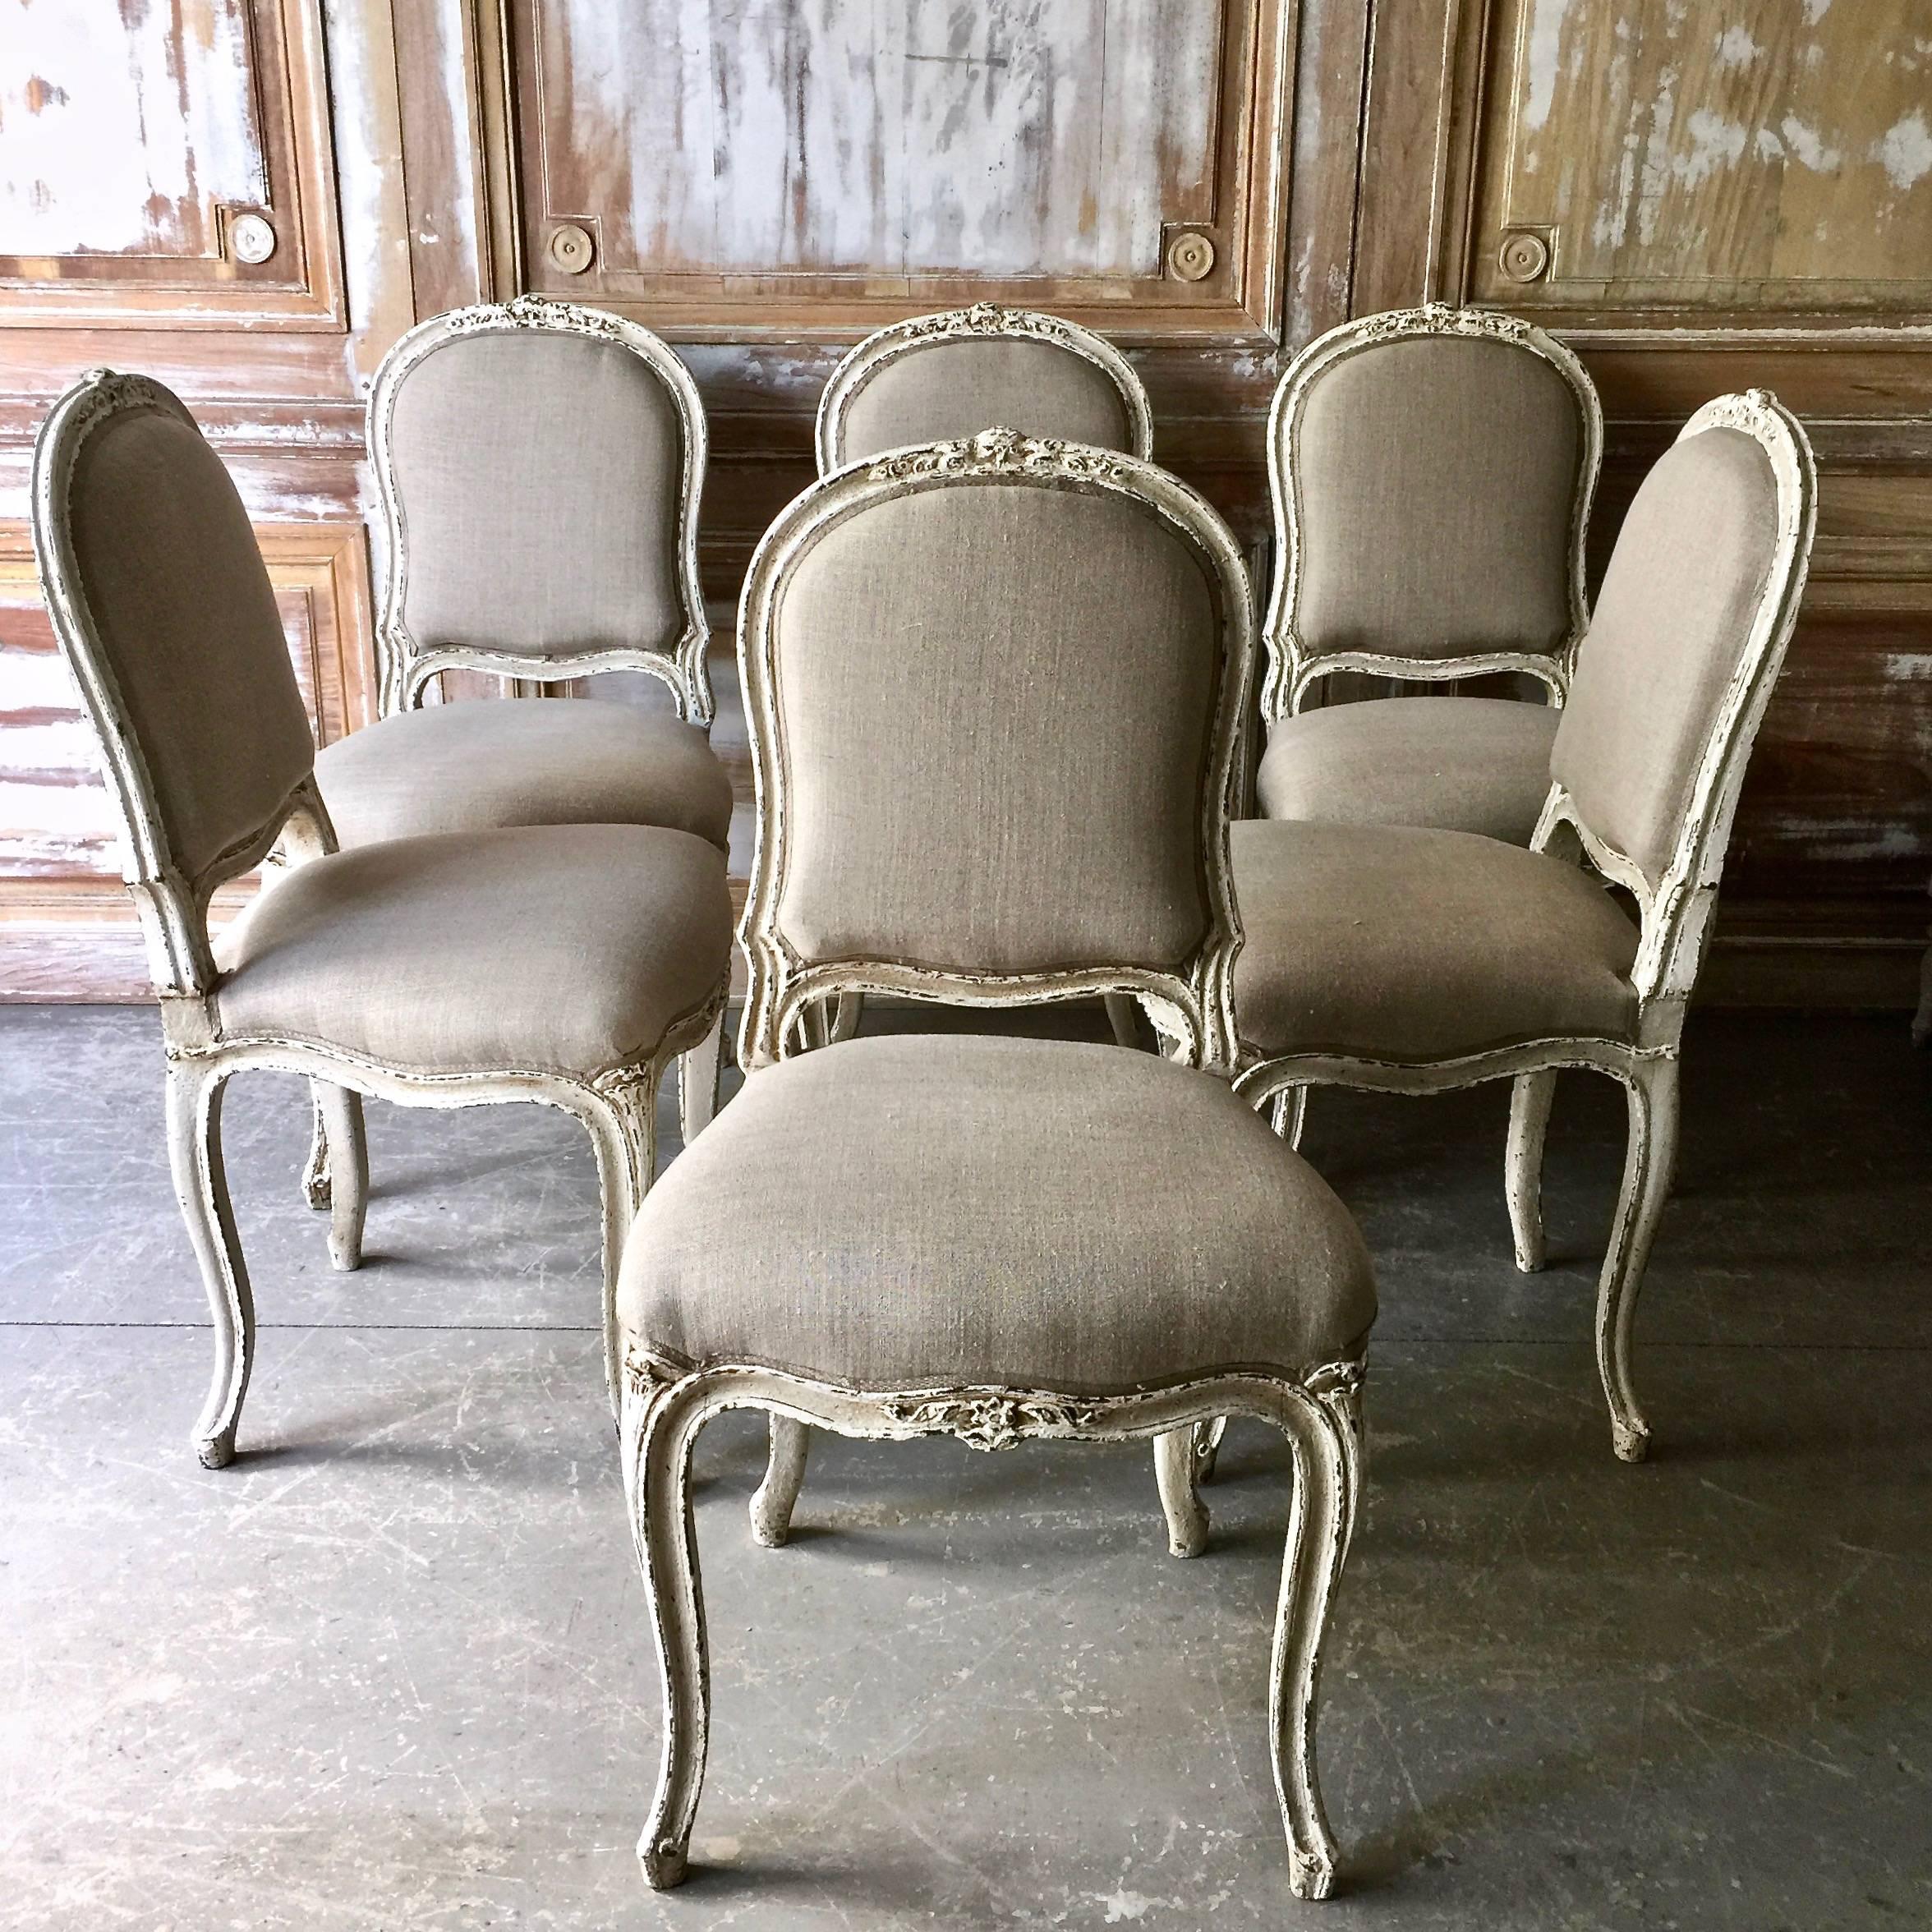 Set of six decoratively carved French Louis XV style chairs, scalloped frieze carved in floret motifs raised on cabriole legs. Upholstered in pale grey linen.
France, circa 1900.
Here are few examples surprising pieces and objects, authentic,